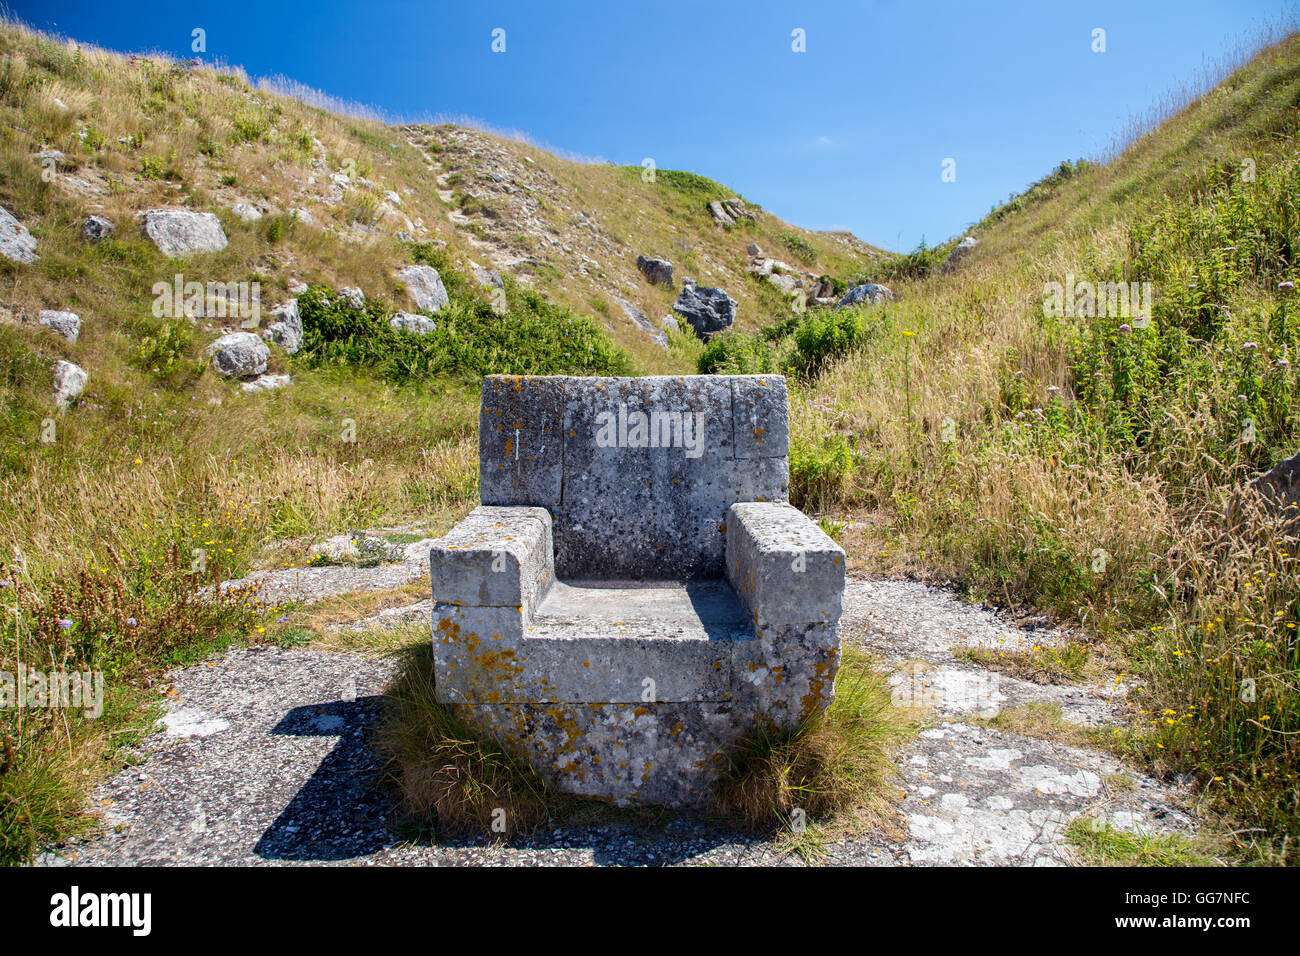 Stone sculptures and carvings in Tout Quarry on the Isle of Portland, Dorset, England Stock Photo